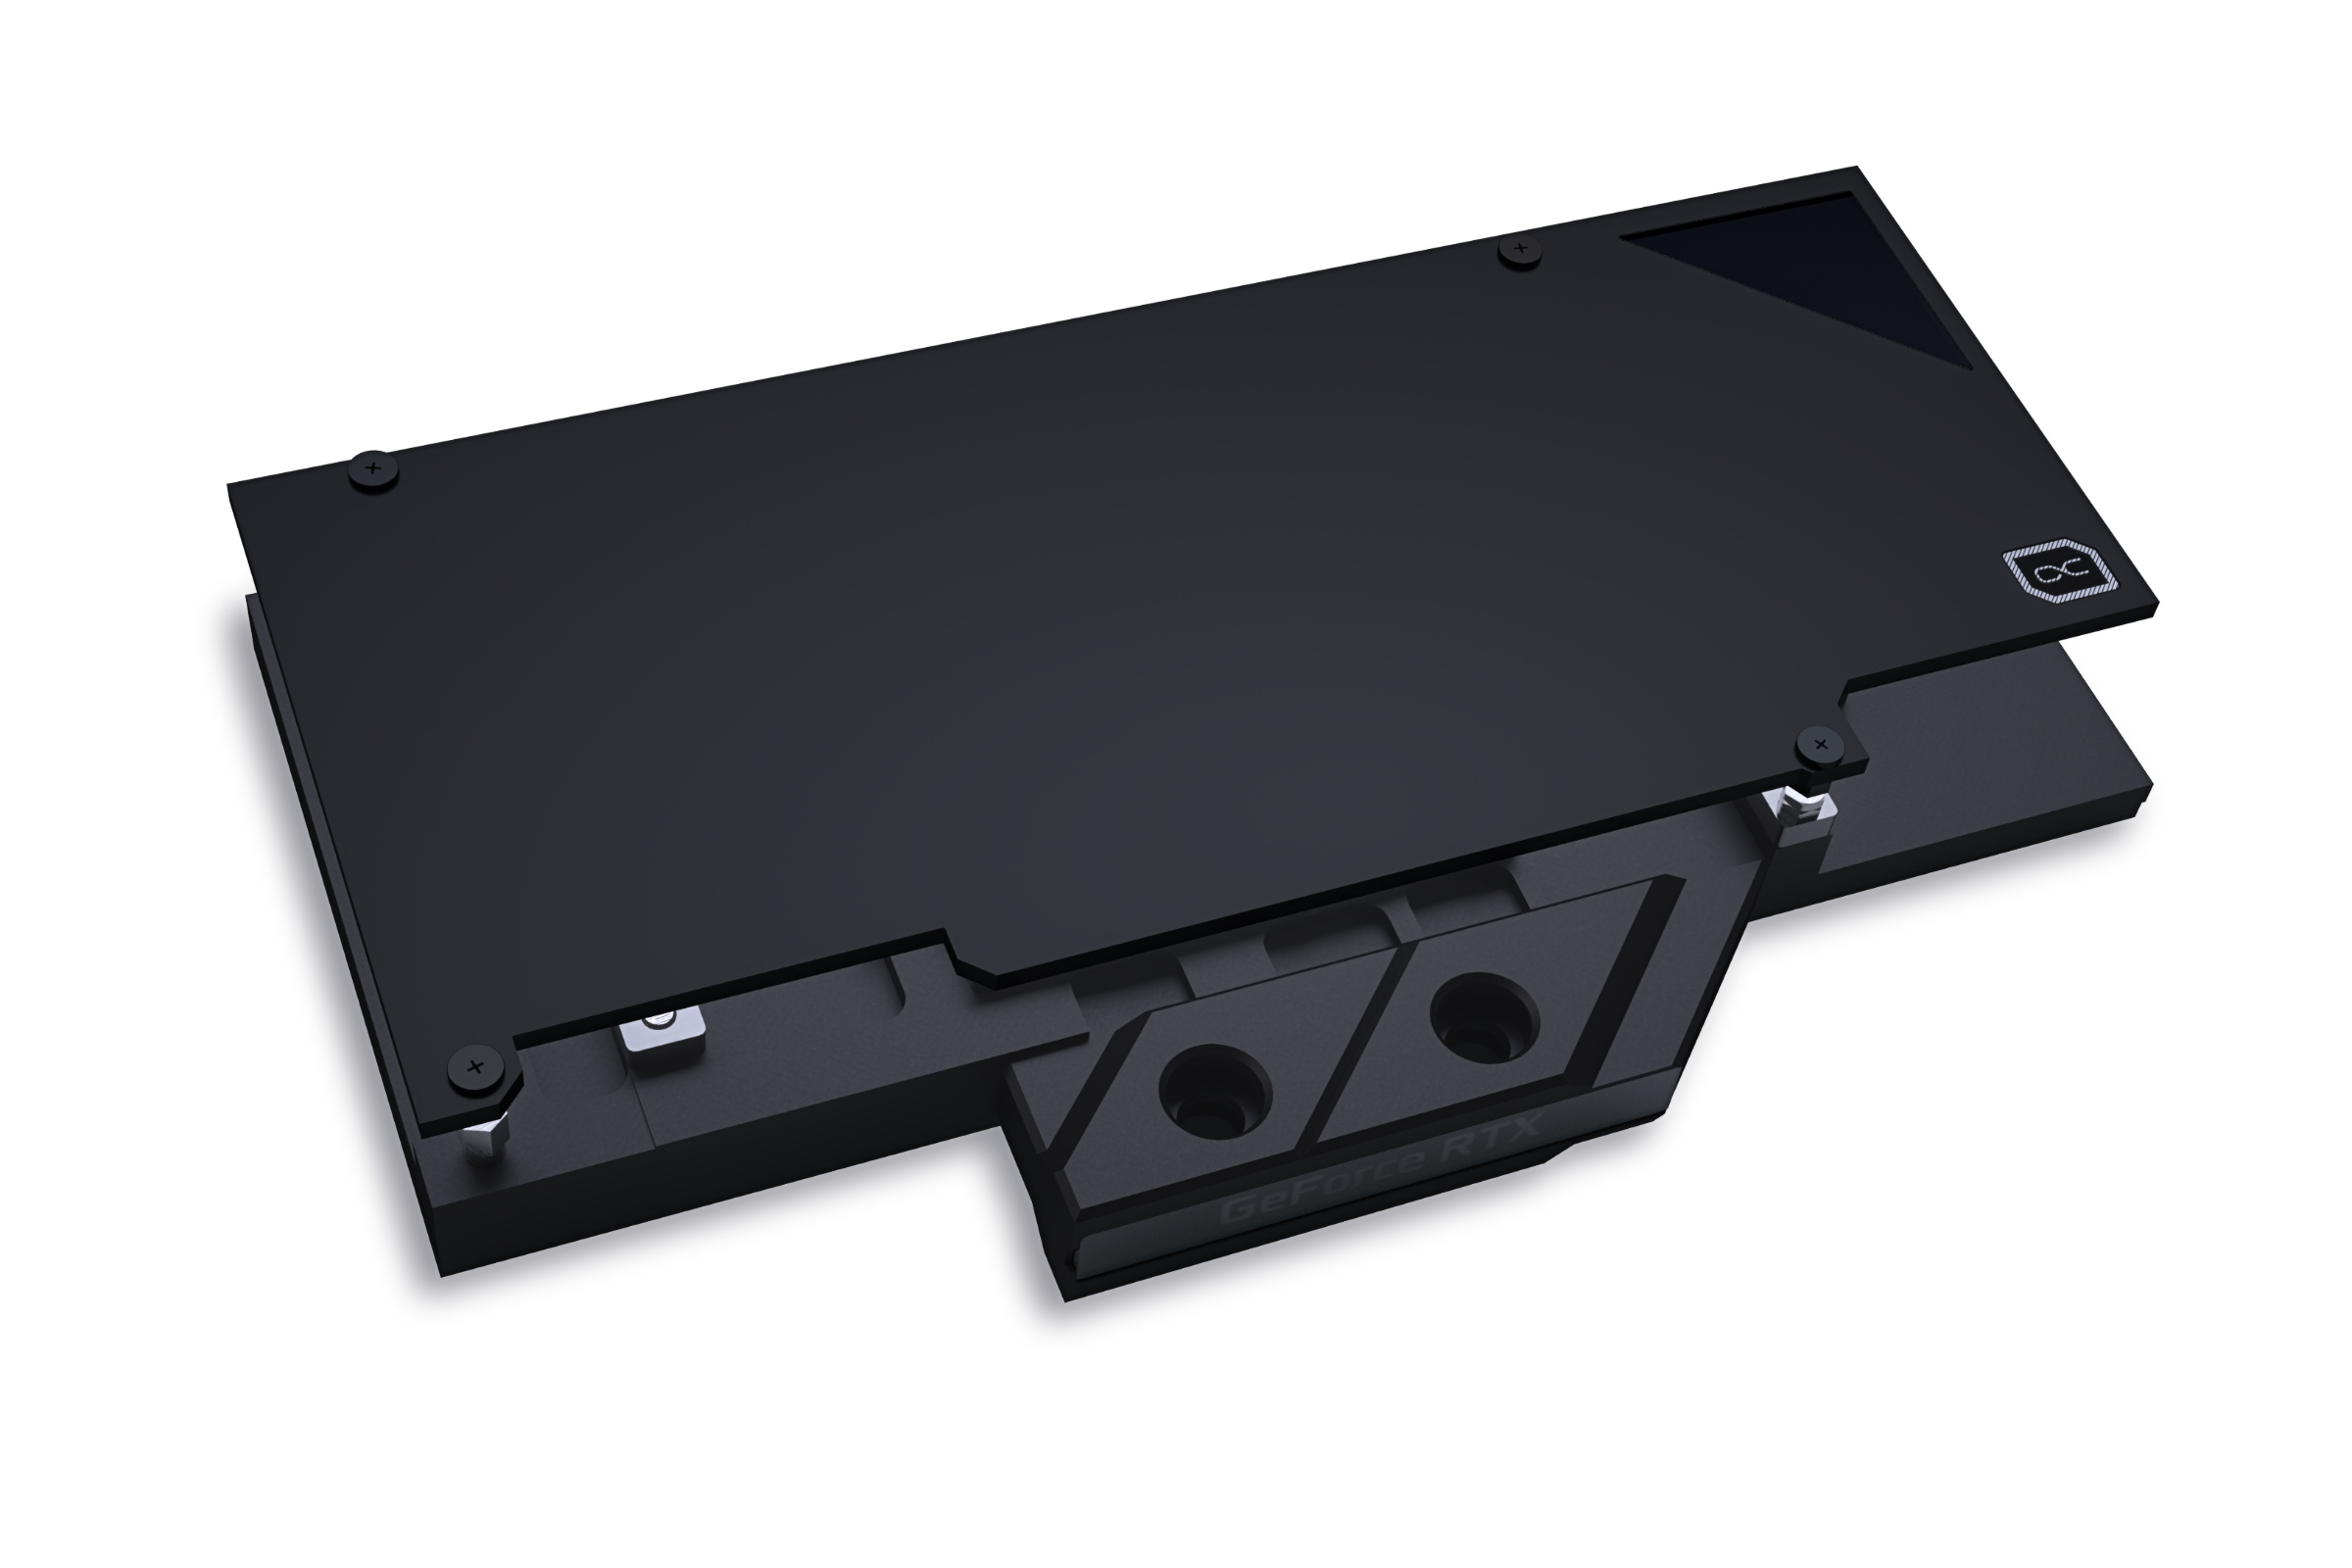 Alphacool Eisblock Aurora Acetal GPX-N RTX 3090/3080 with Backplate (Reference)